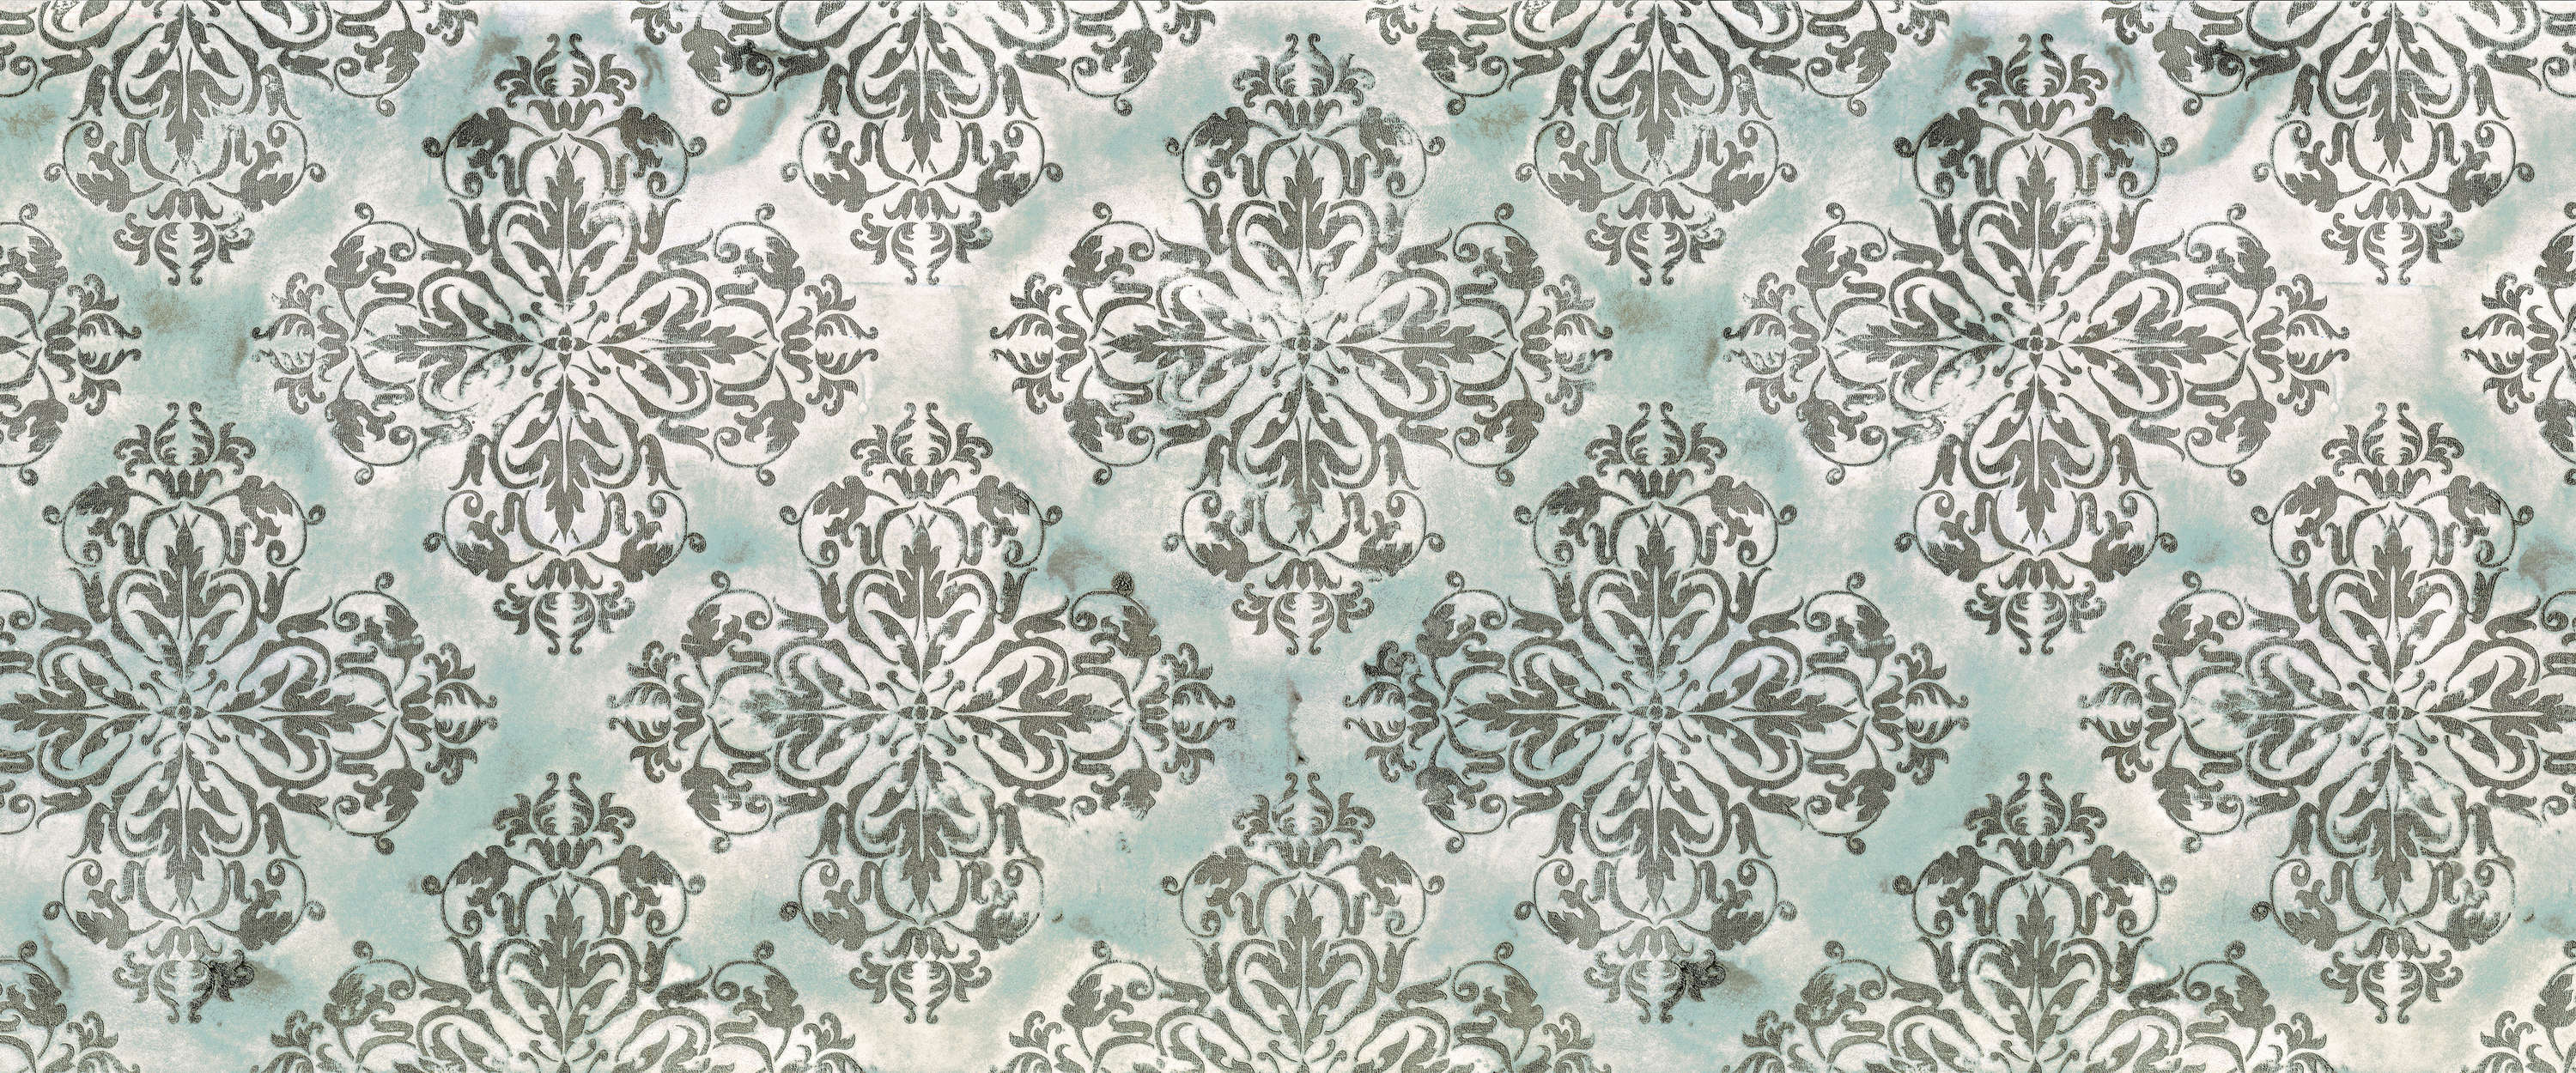             Photo wallpaper grey blue with ornament pattern & watercolour colours
        